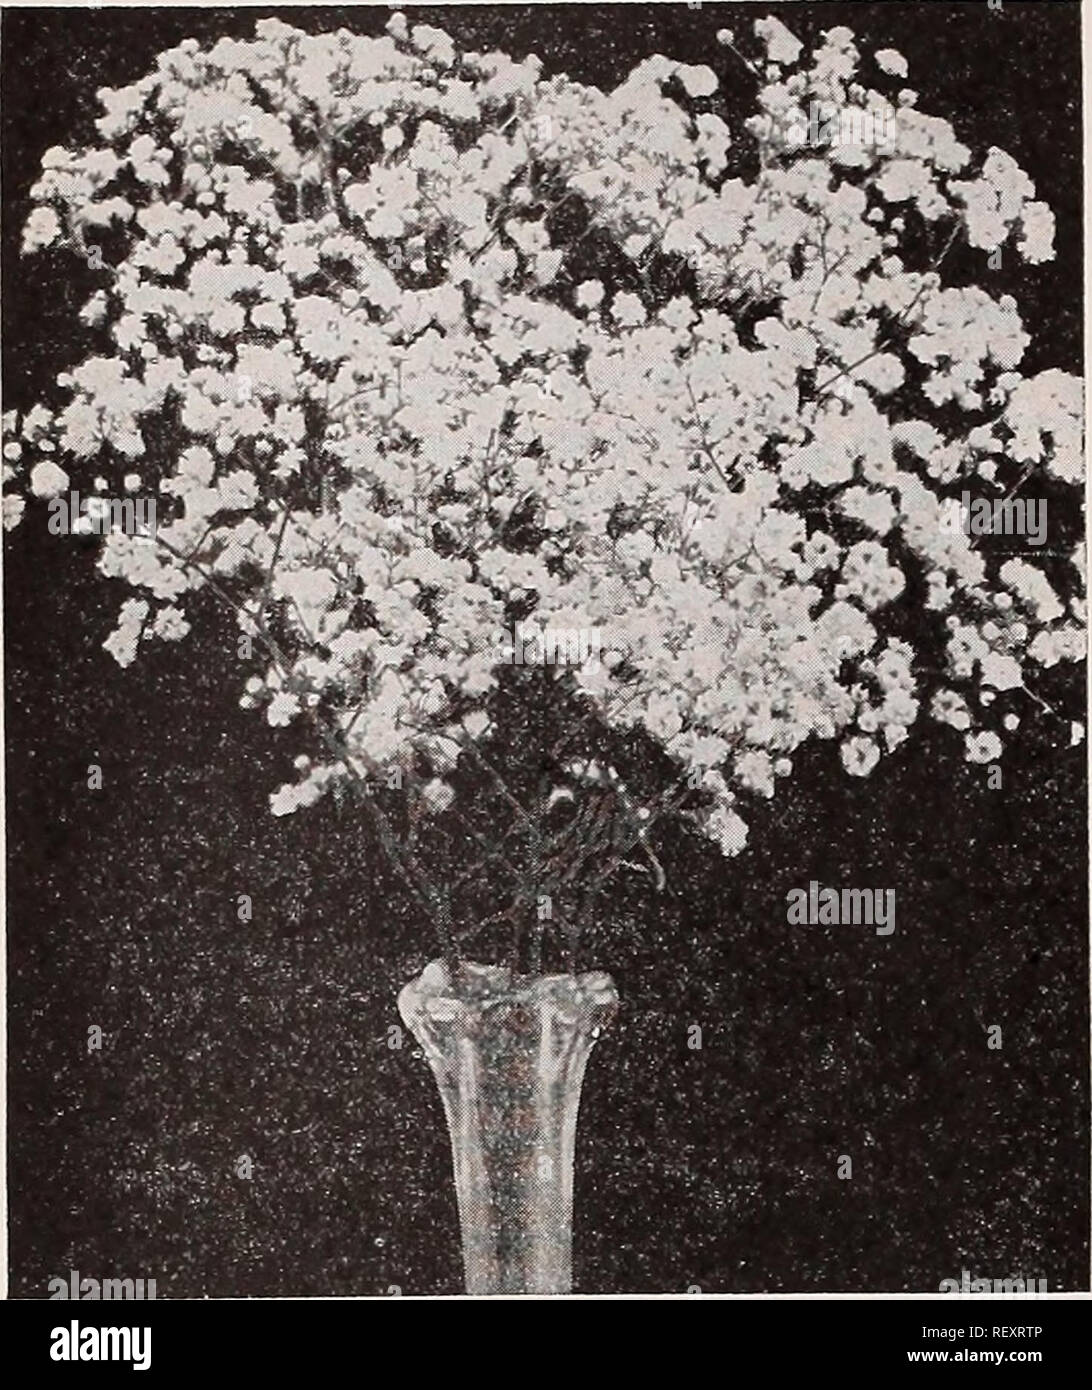 . Dreer's wholesale catalog for florists : autumn 1938 edition. Bulbs (Plants) Catalogs; Vegetables Seeds Catalogs; Flowers Seeds Catalogs; Nurseries (Horticulture) Catalogs; Gardening Equipment and supplies Catalogs. HENRY A, DREER Hardy Perennial Plants wholesale cataloc^. Double Gypsophila Bristol Fairy Gypsophila—Baby's Breath Bristol Fairy. A splendid double-flowering variety. Strong, 2-year, field-grown plants, $3.50 per doz.; $25.00 per 100. Fauiculata flore pleno. Strong, field-grown, flowering roots of this desirable double-flowering form of Baby's Breath. $3.50 per doz.; $25.00 per 1 Stock Photo